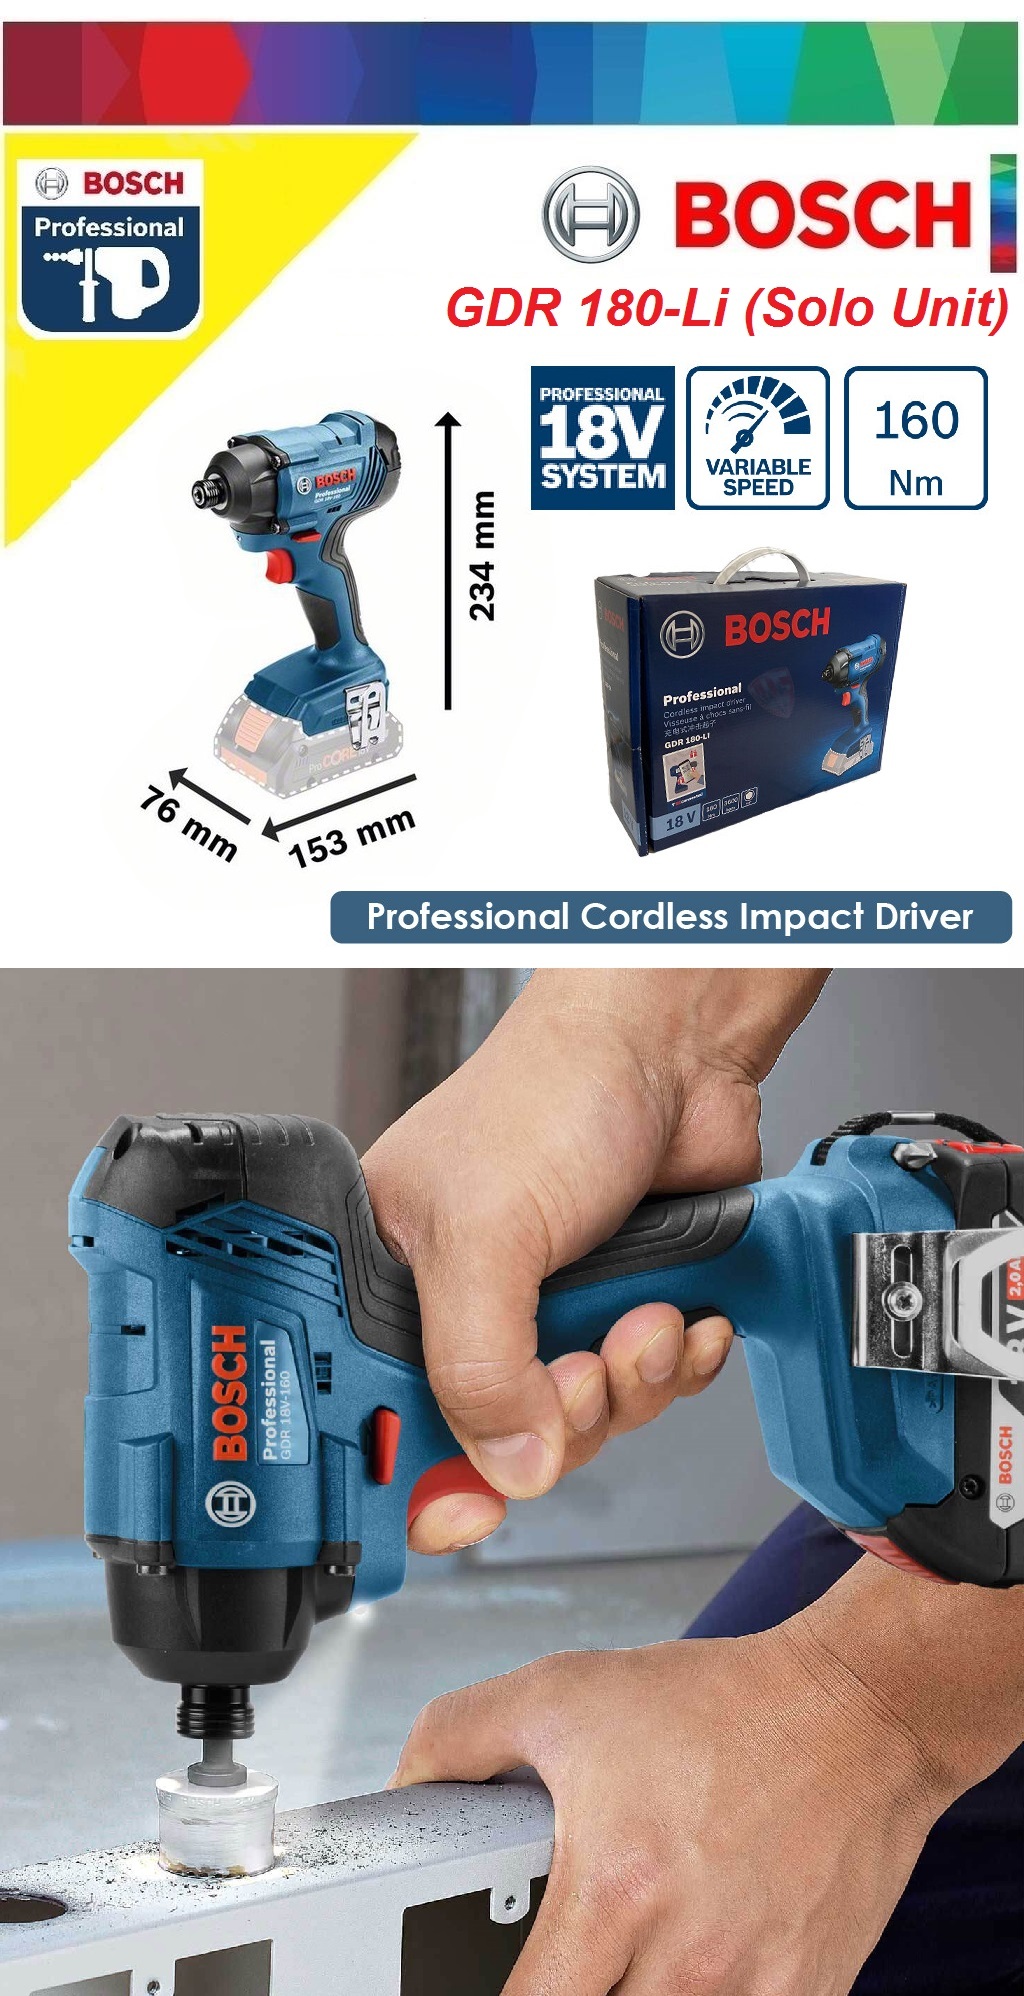 Bosch GDR 18V Cordless 1/4" Hex 160Nm Impact Driver (Solo Unit) – MY Power  Tools